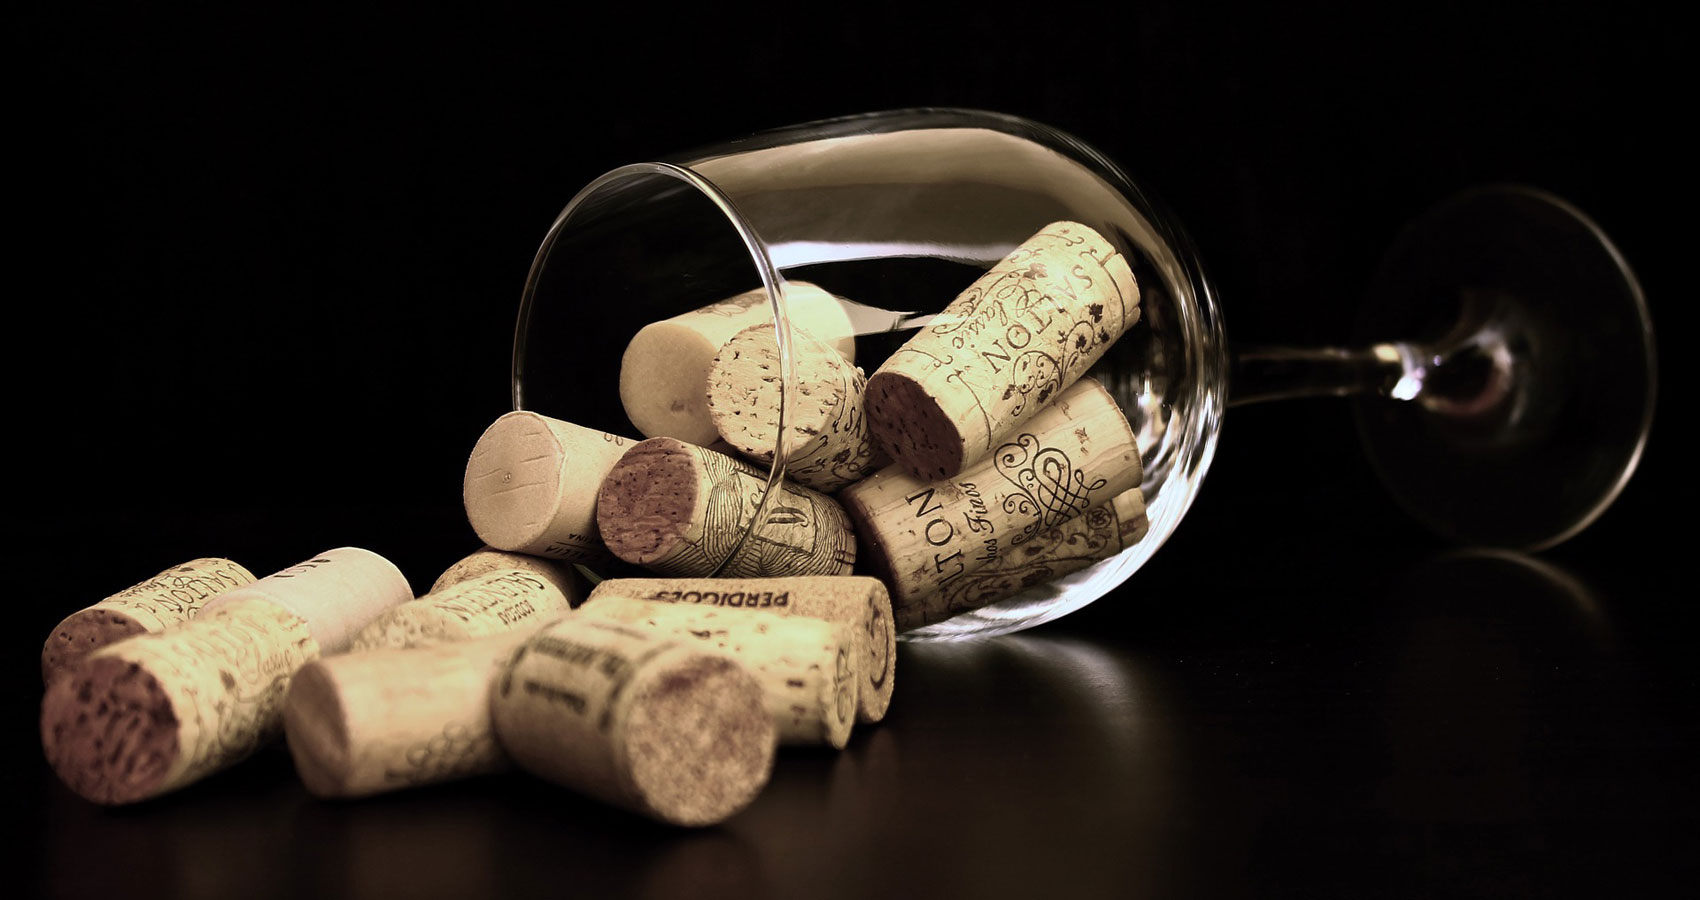 Crooked Corks, a poem by Michael (Mickey) Mason at Spillwords.com